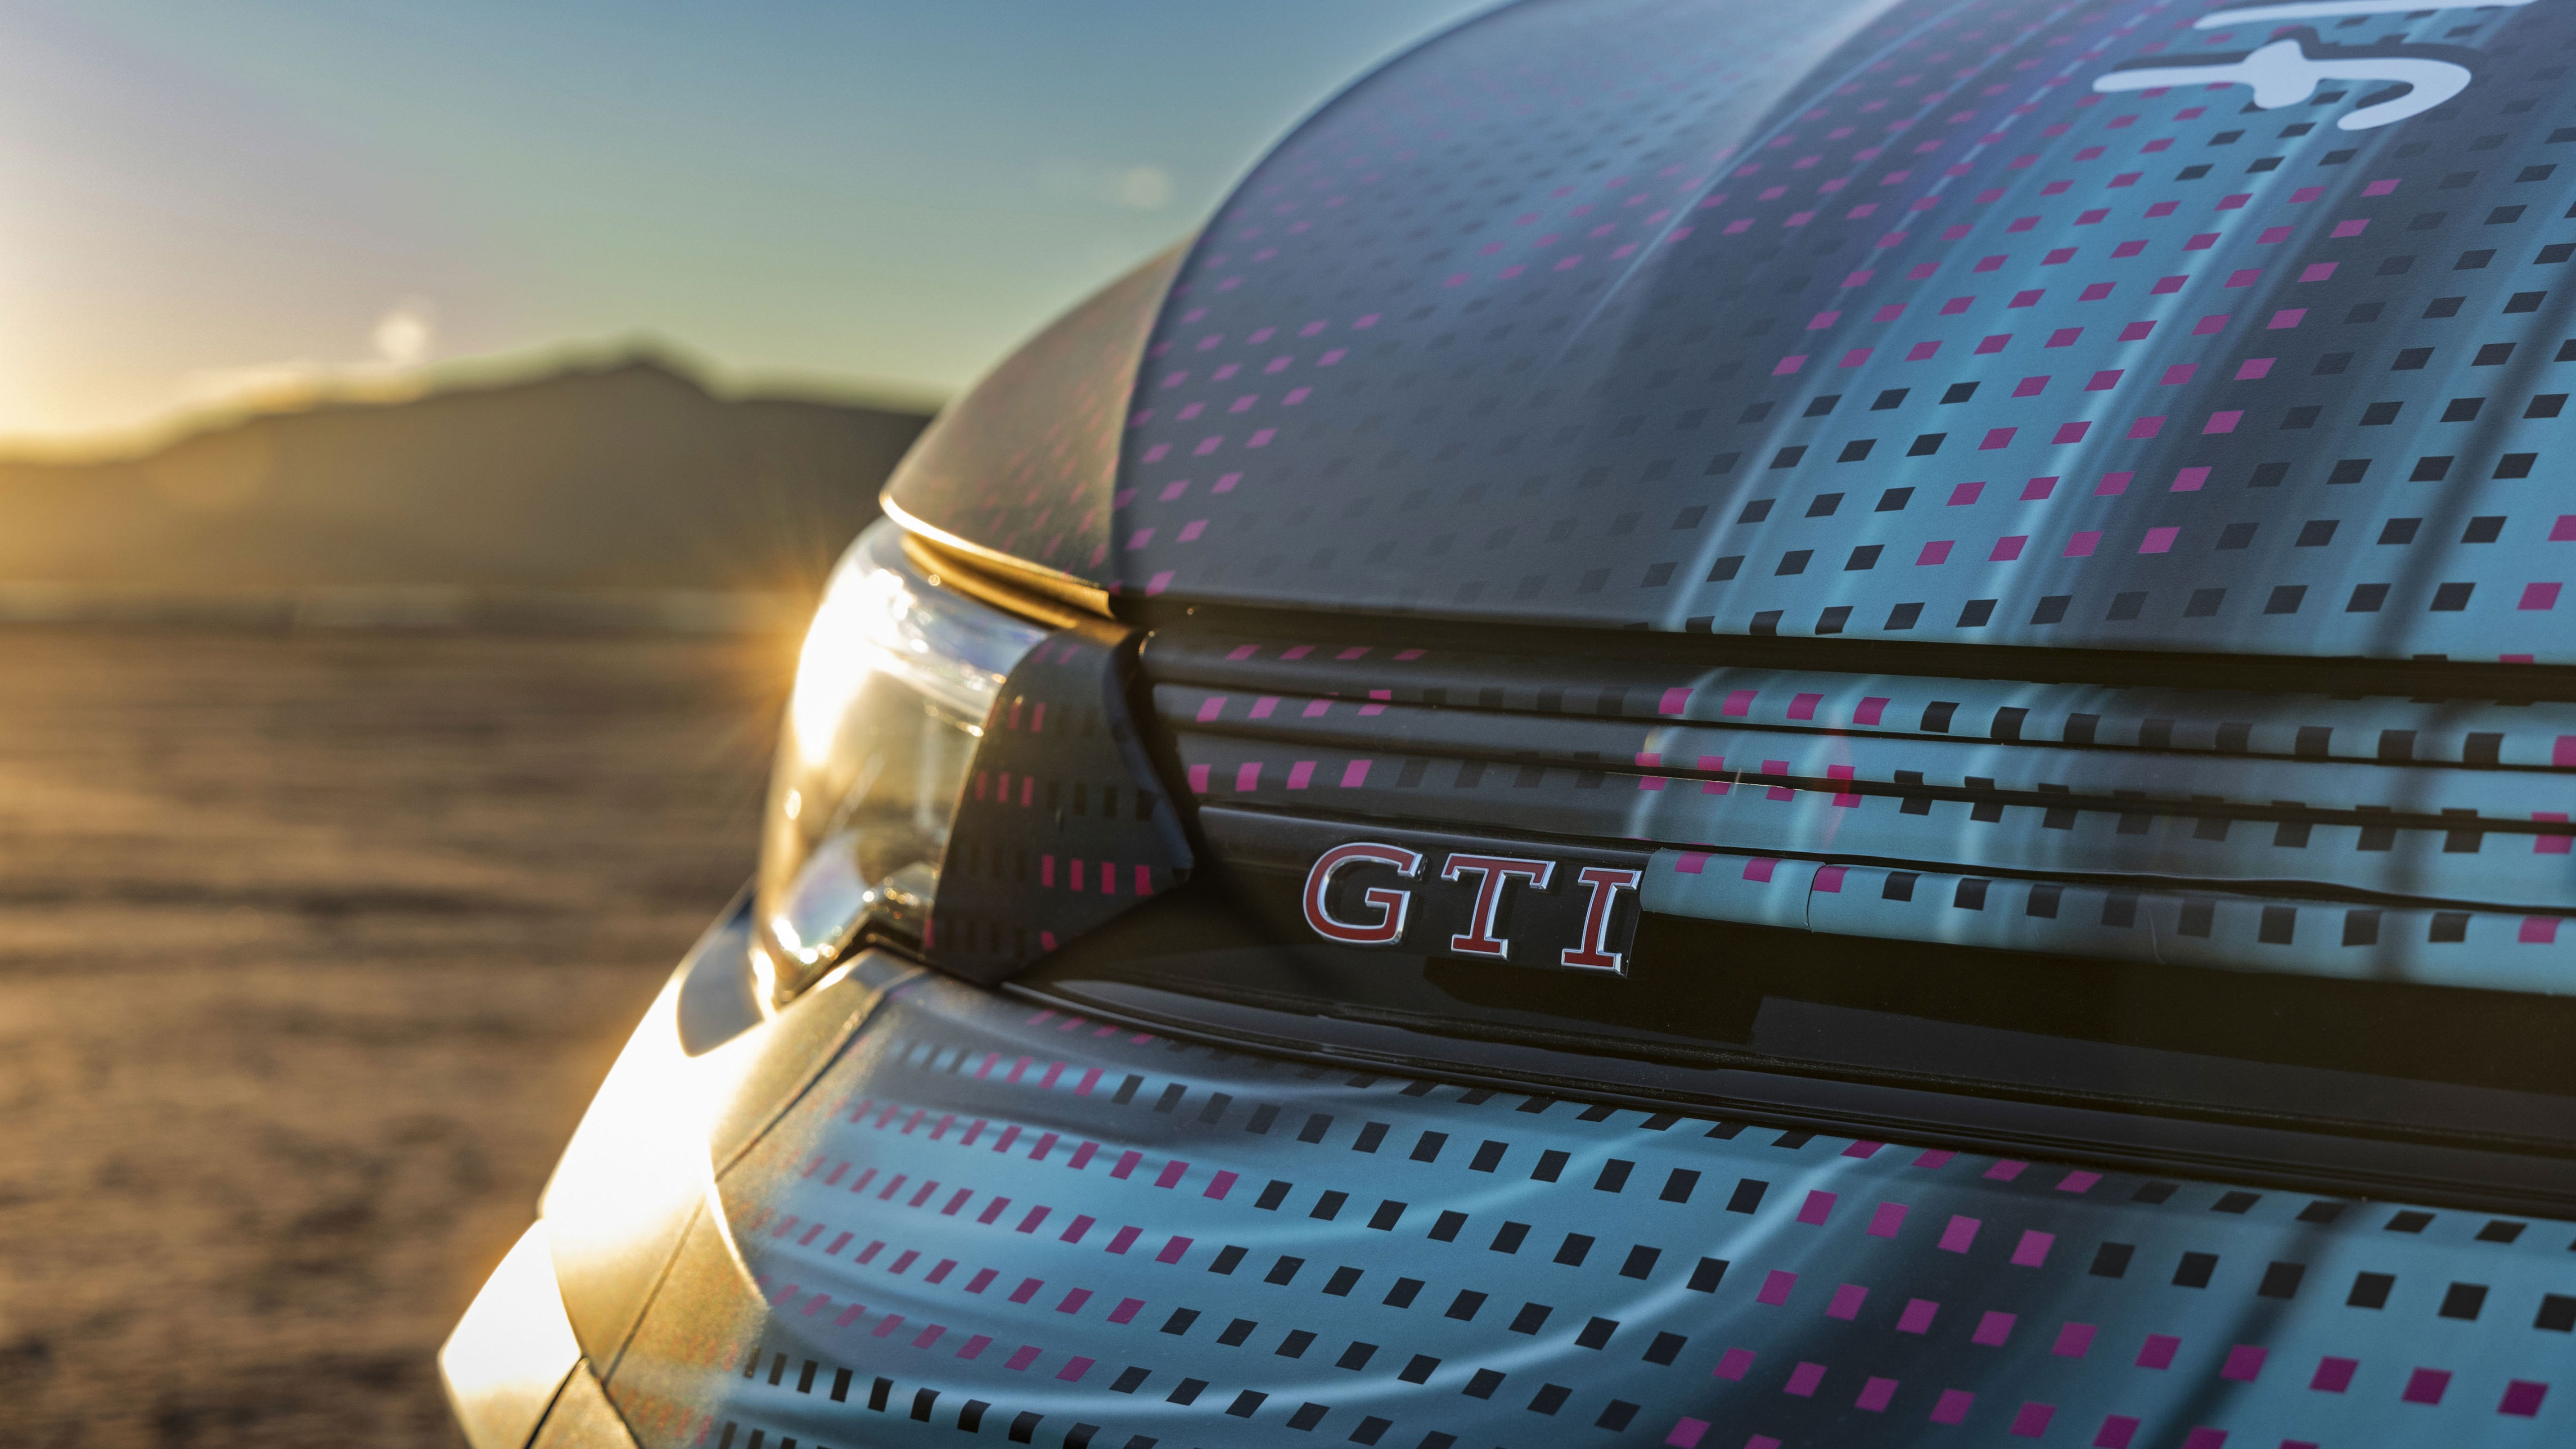 here's your first look at the new mk8.5 volkswagen golf gti